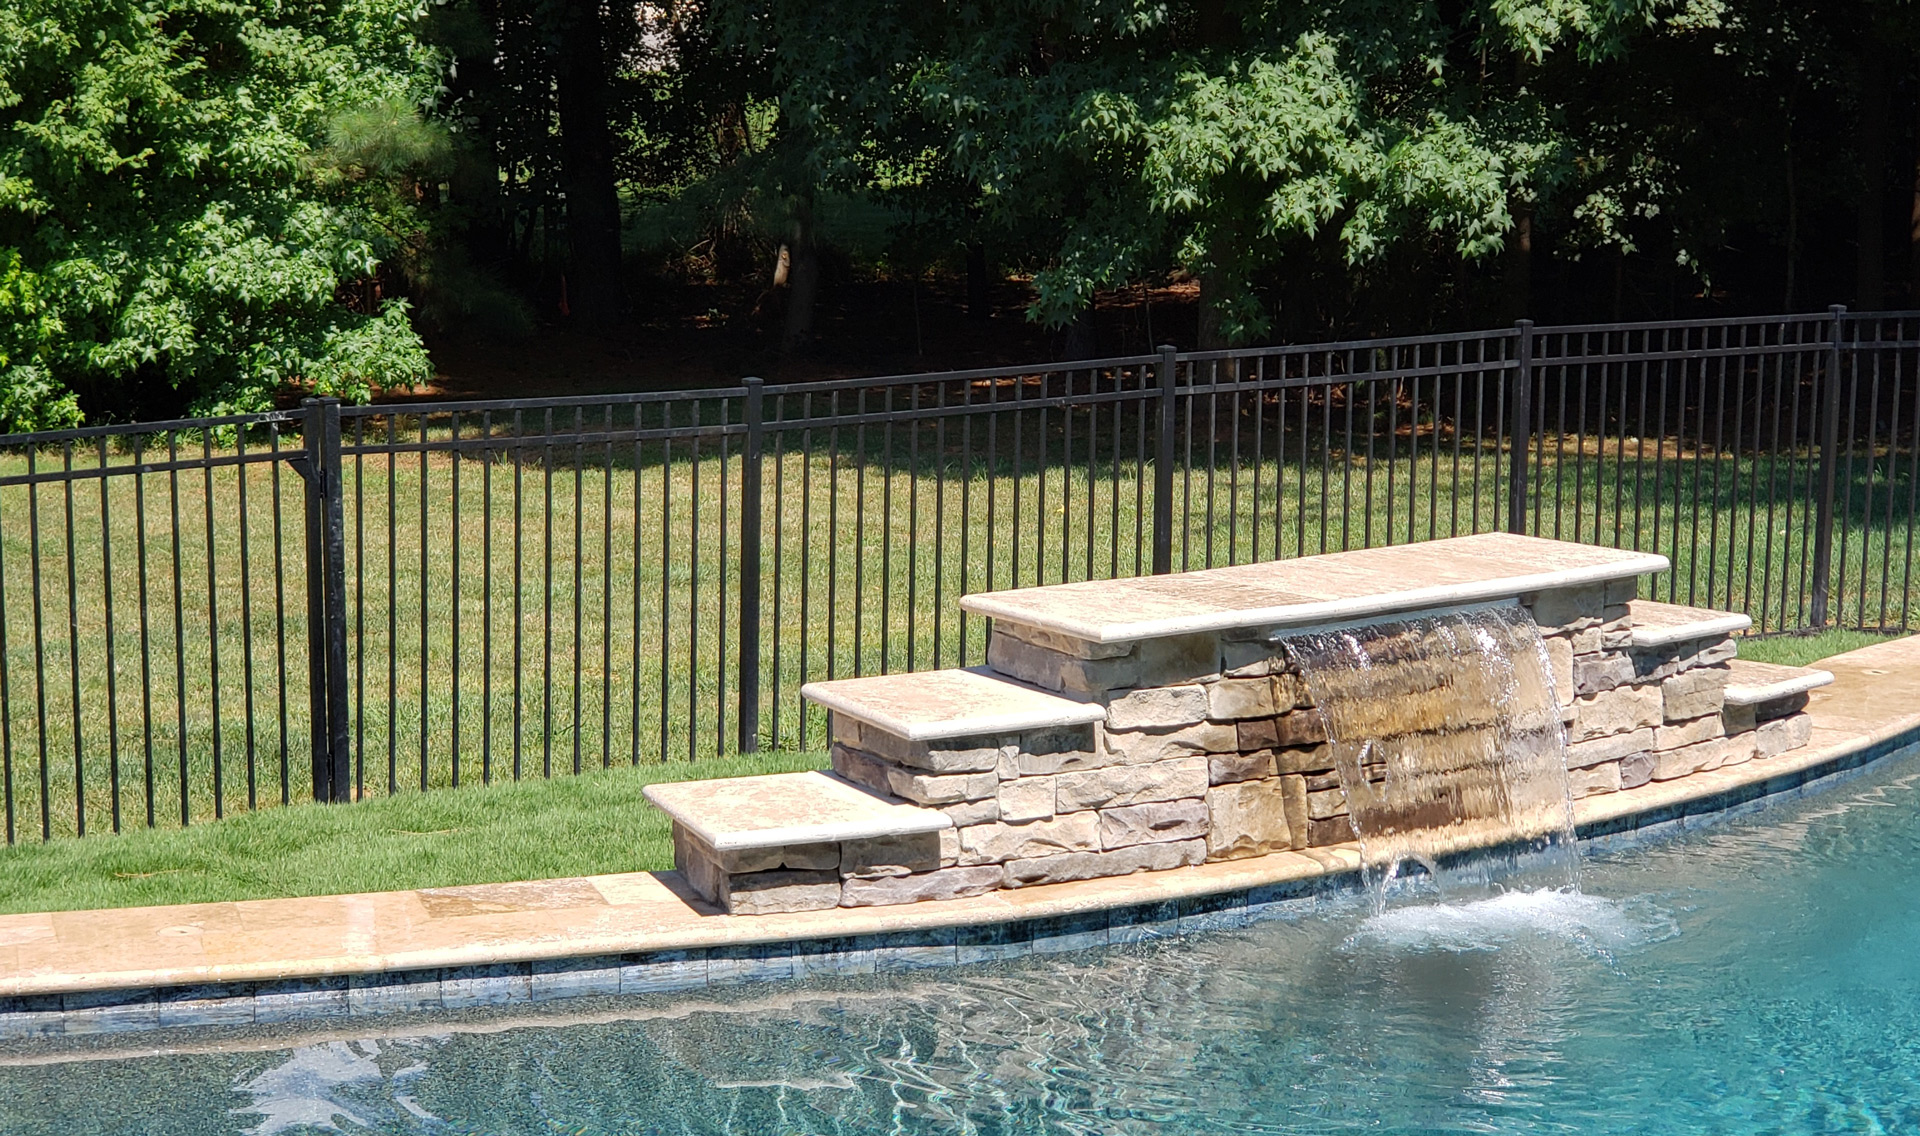 Metal fencing next to pool and fountain